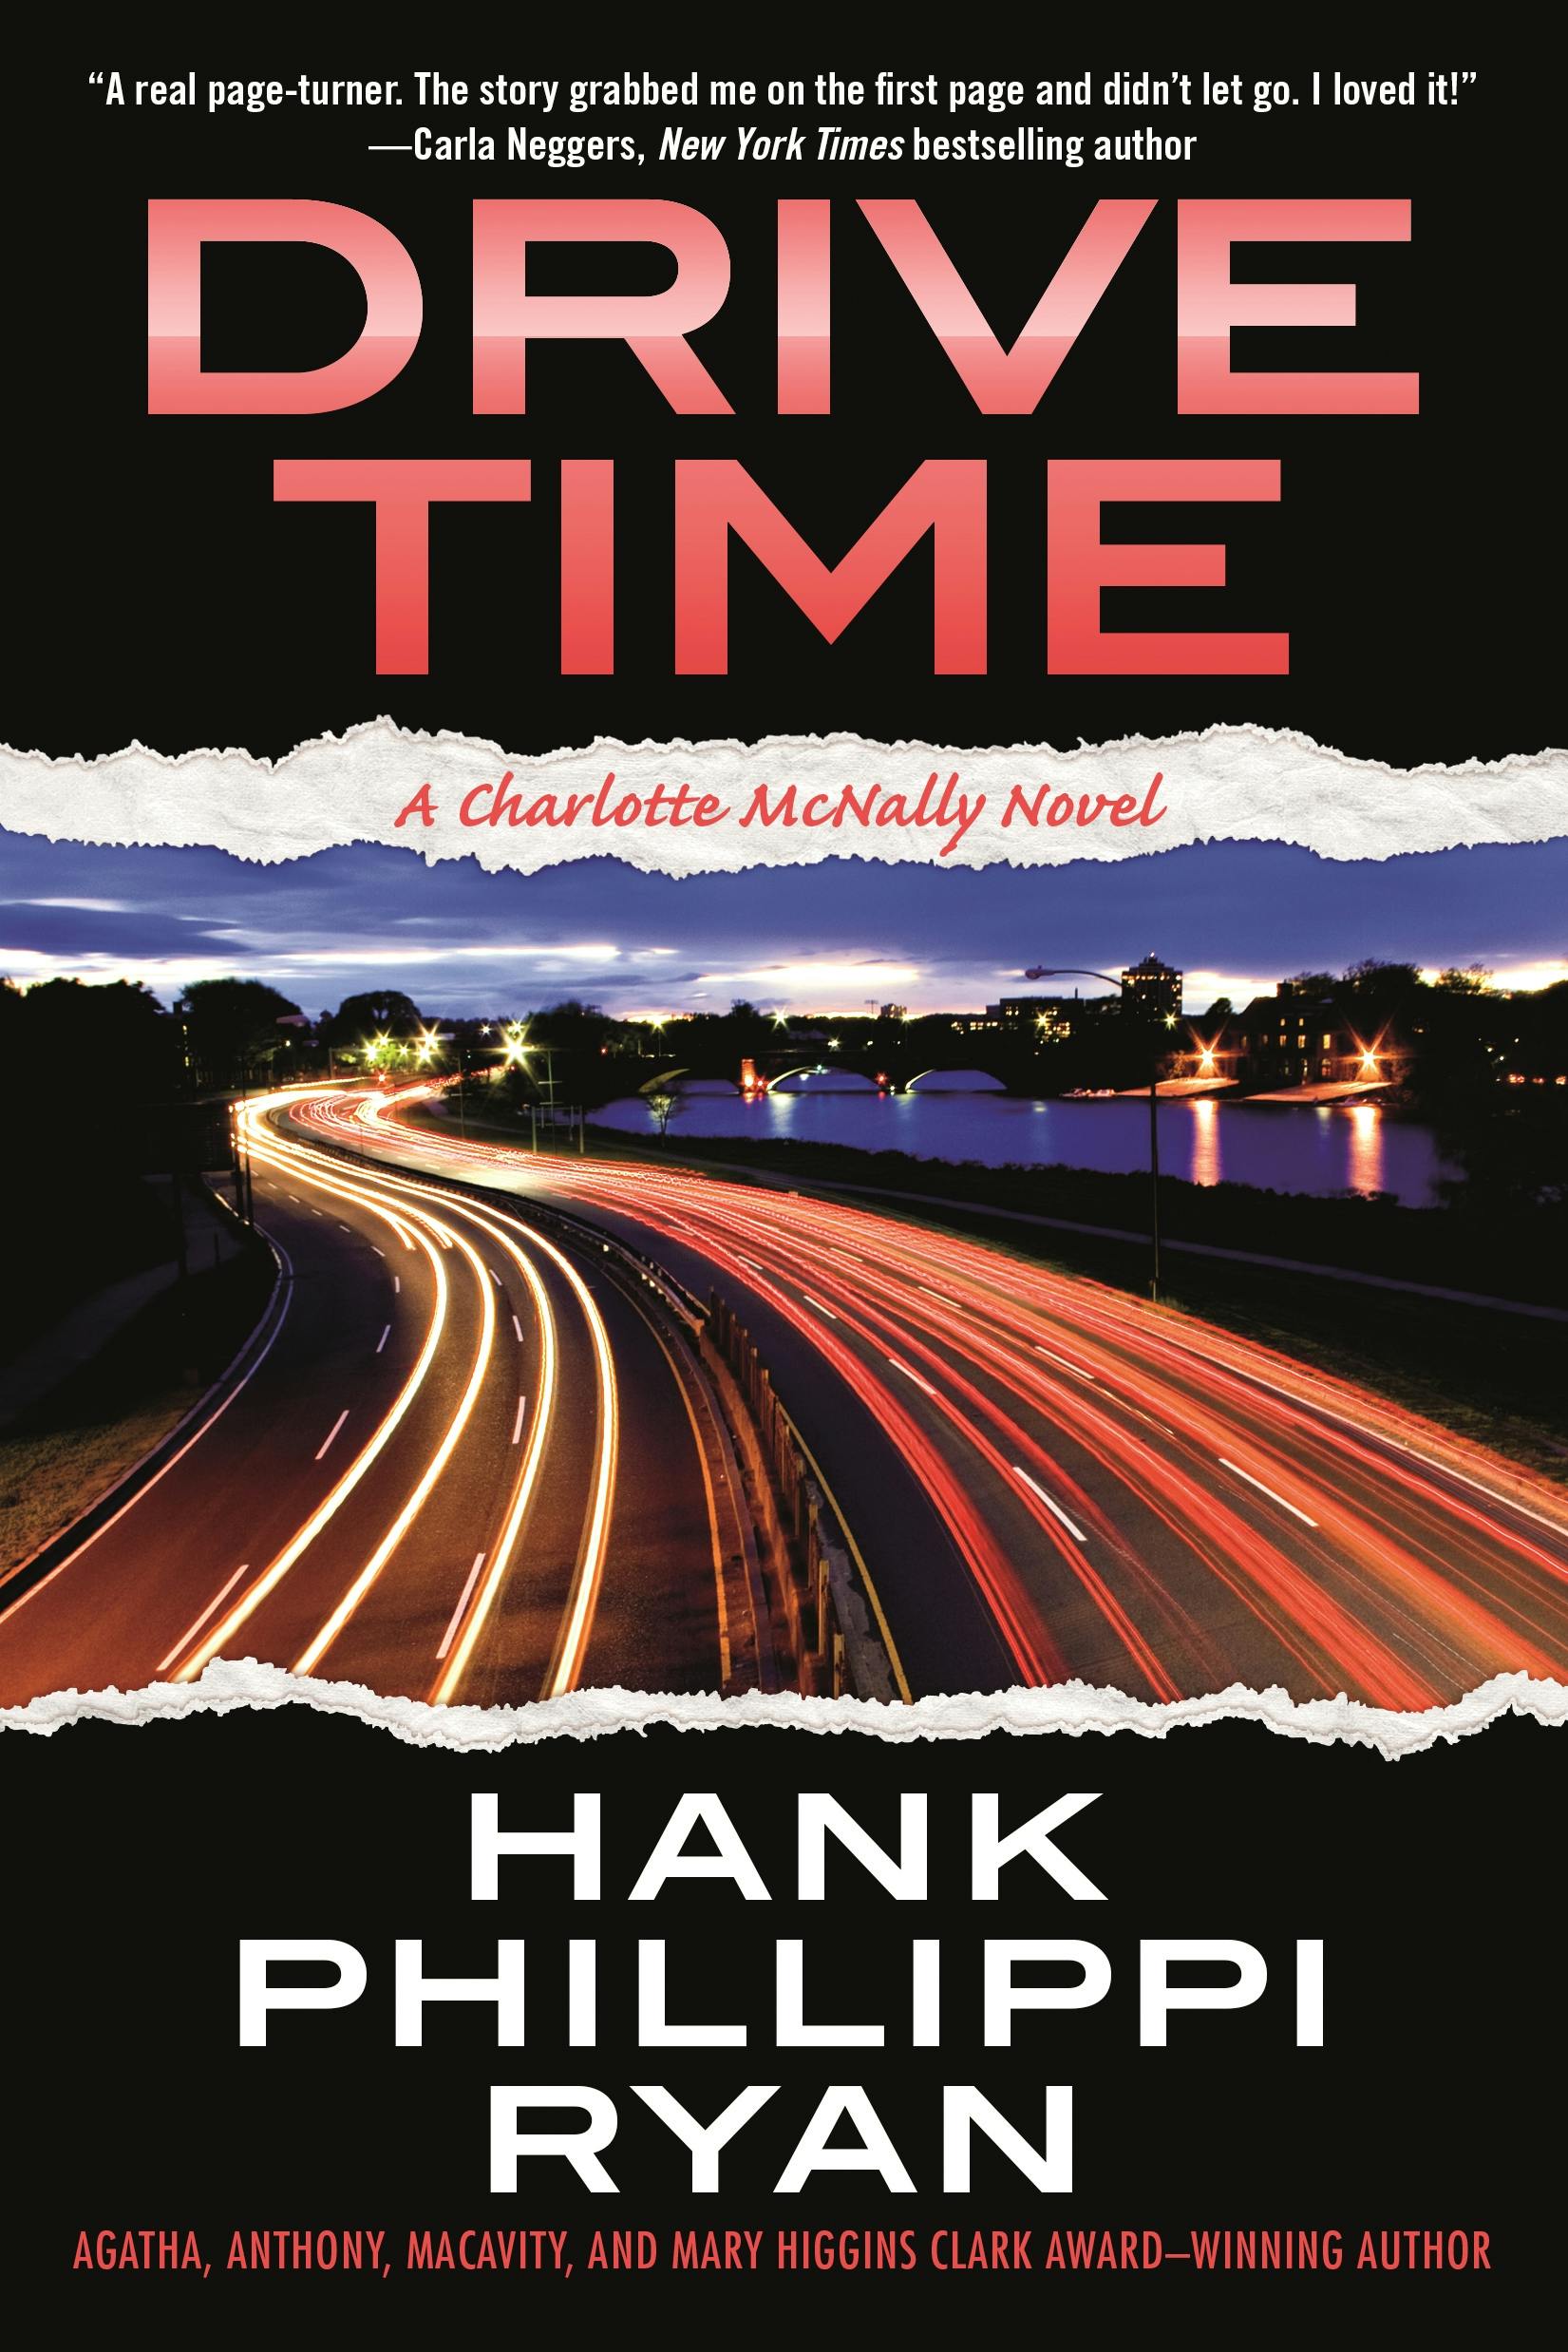 Cover for the book titled as: Drive Time